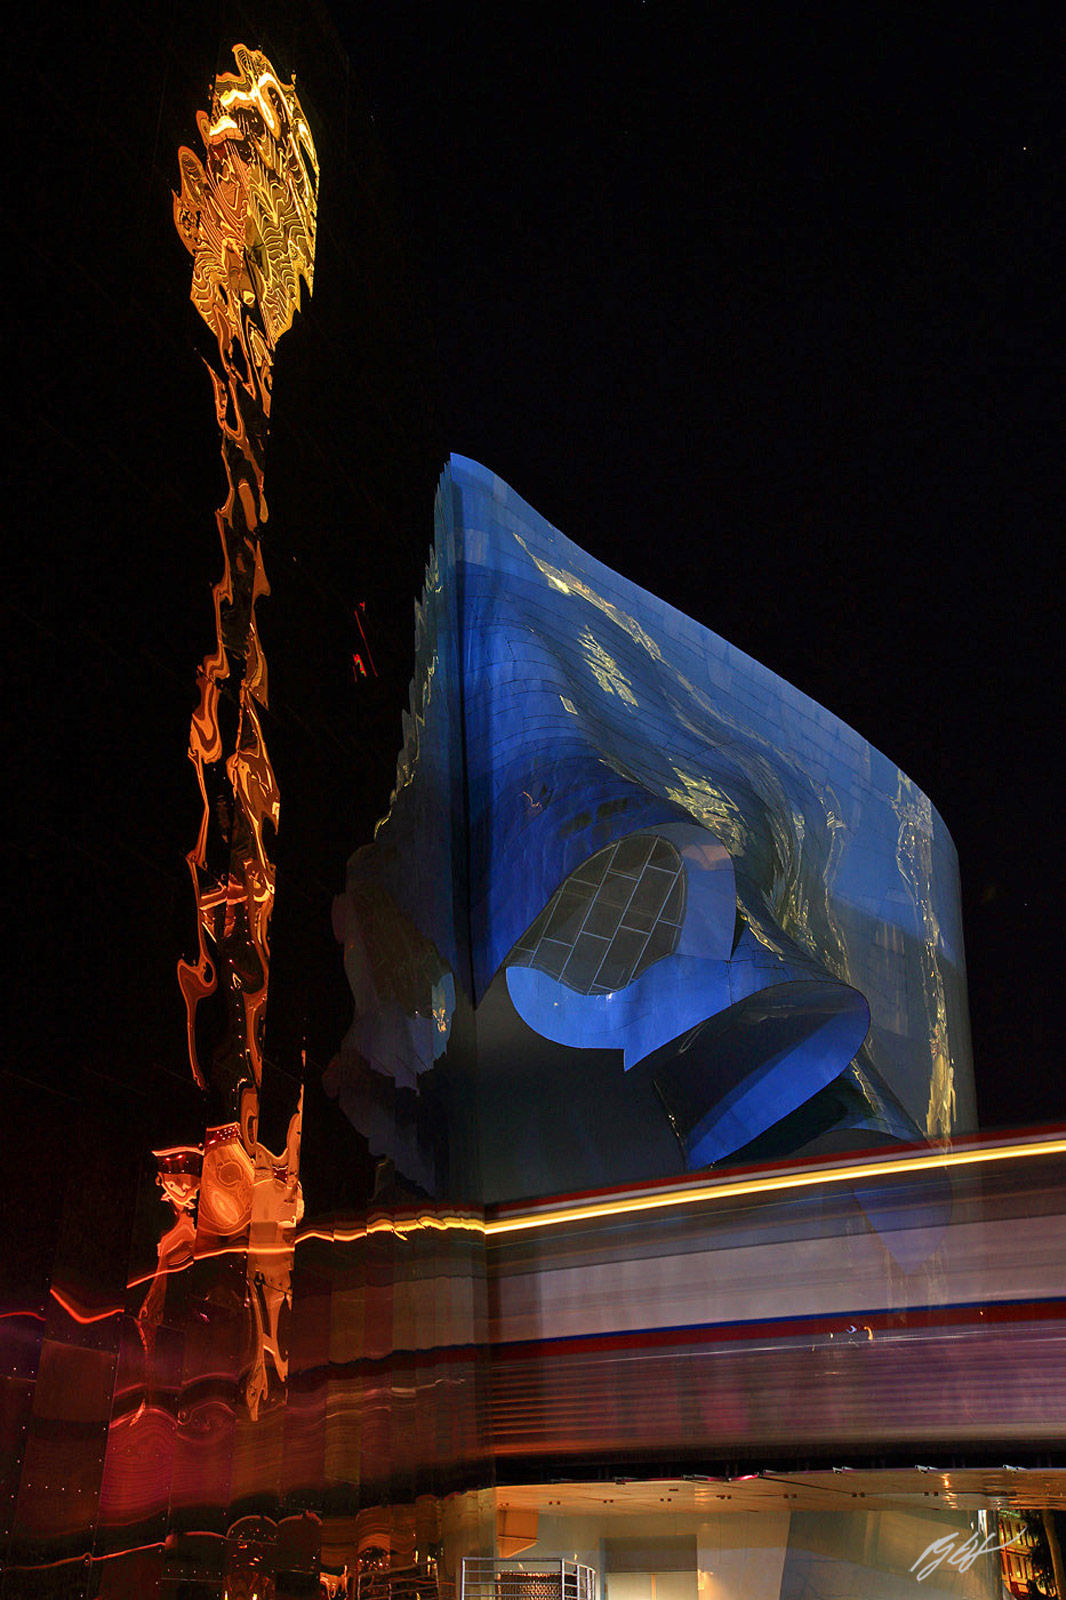 The Space Needle and the Experience Music Project in Seattle Center in Seattle, Washington